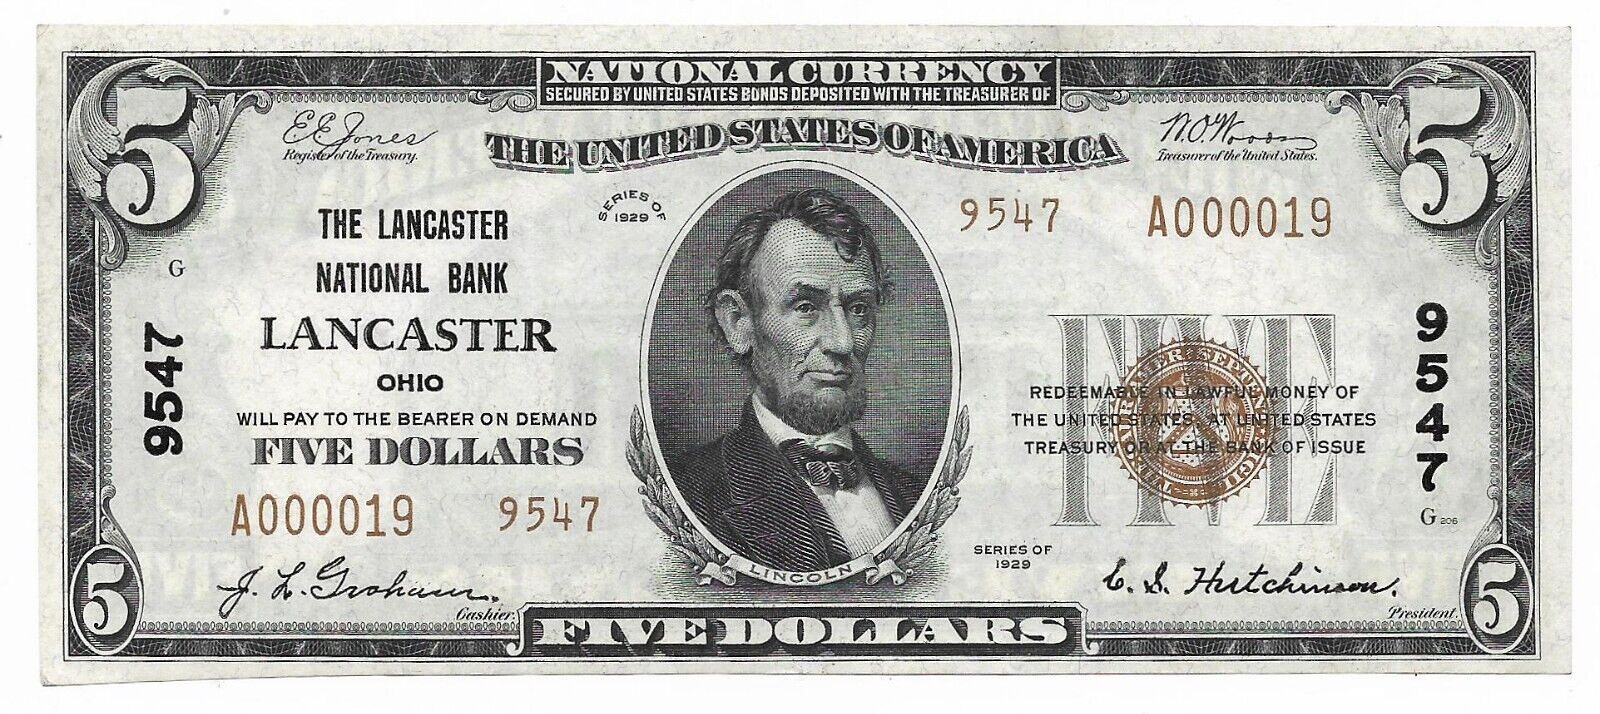 The Lancaster National Bank Of Lancaster Ohio - 1929 $5 Note - Ch 9547